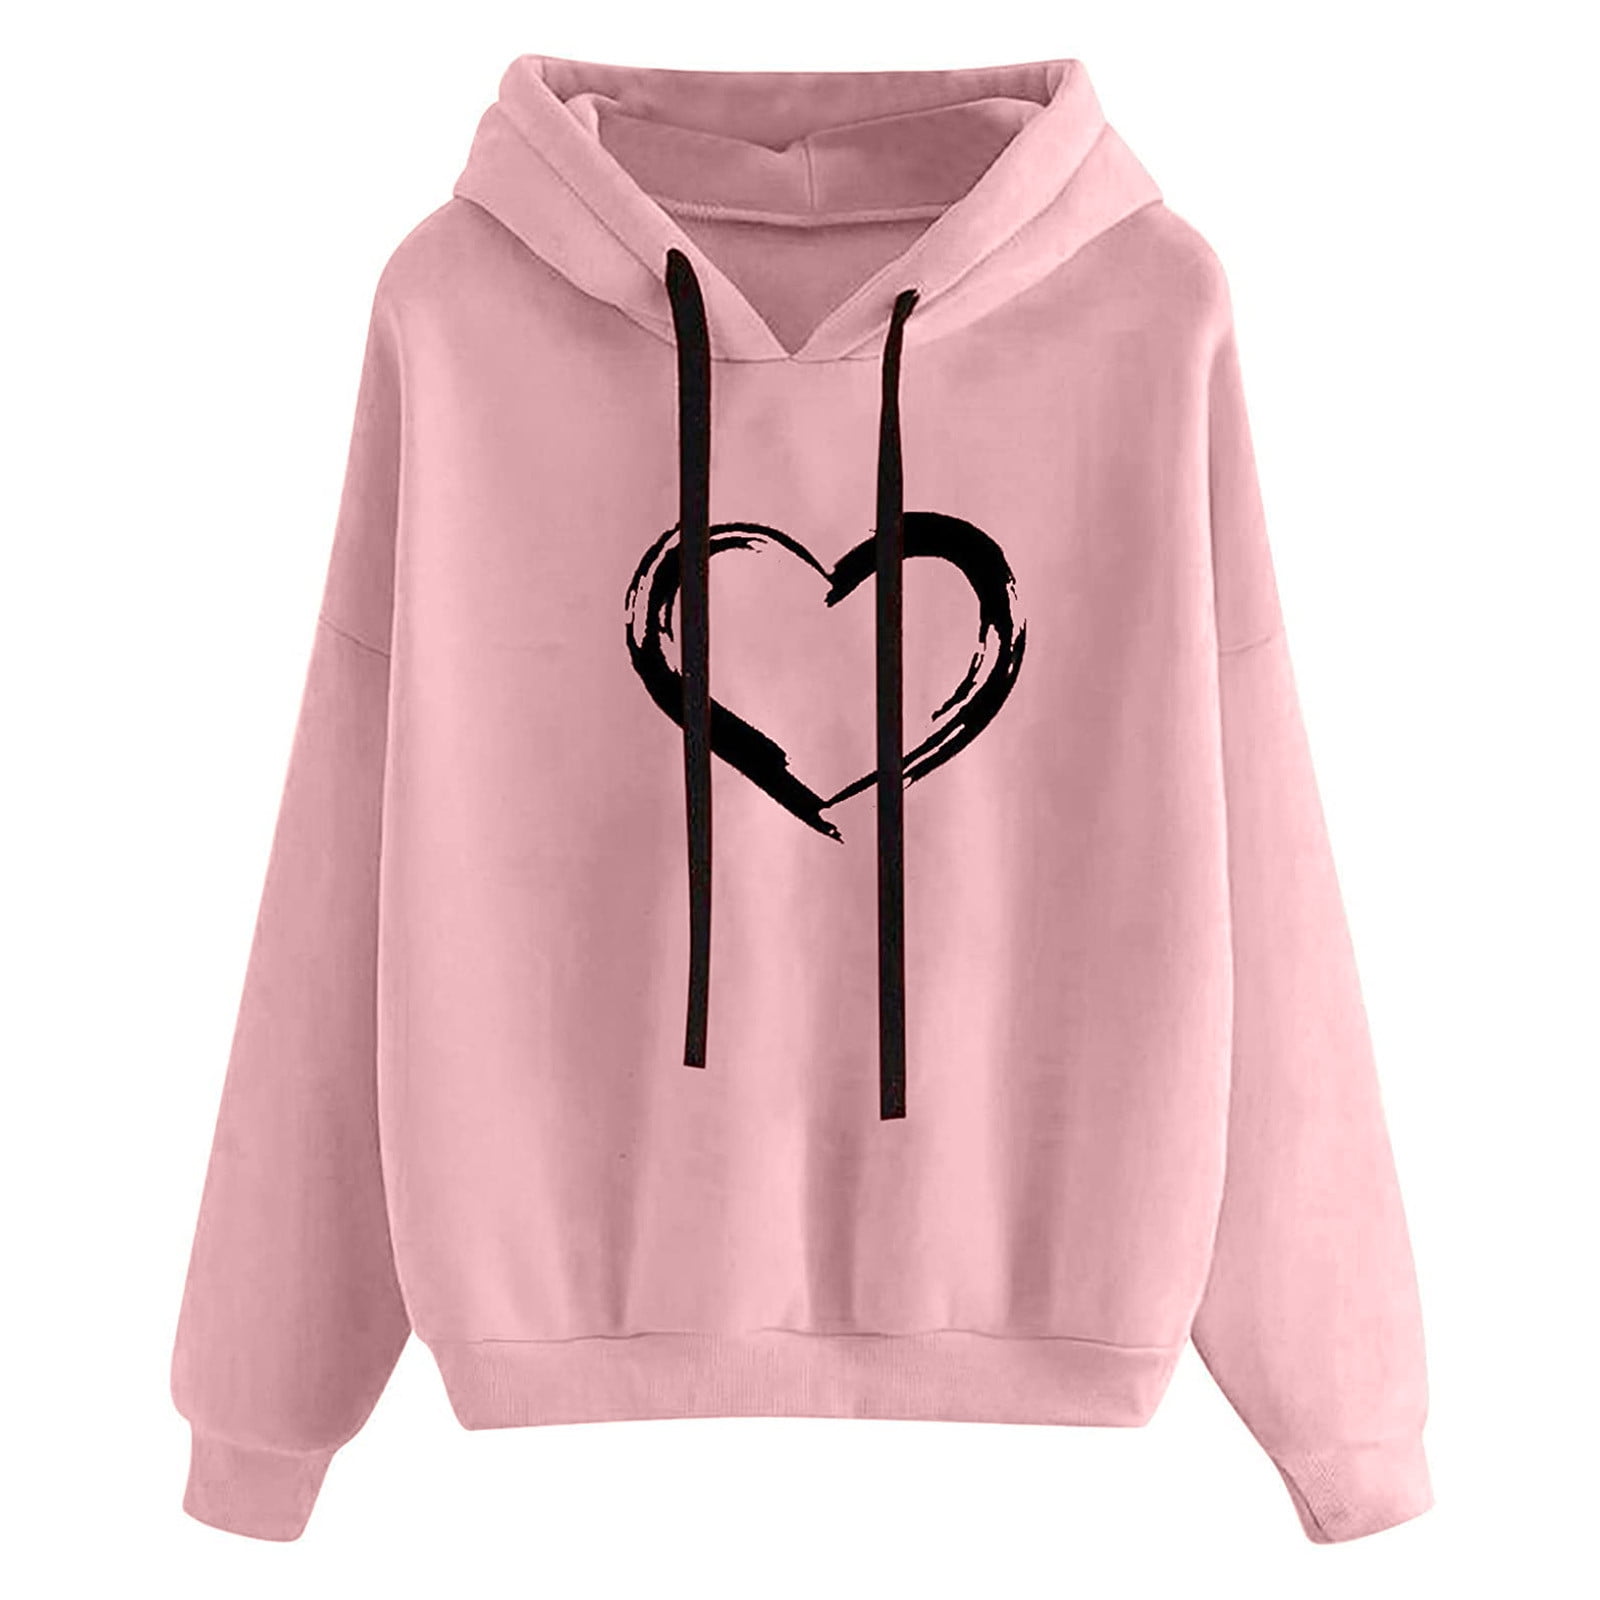 hoodies for women heart printing comfy hoodies bright color long